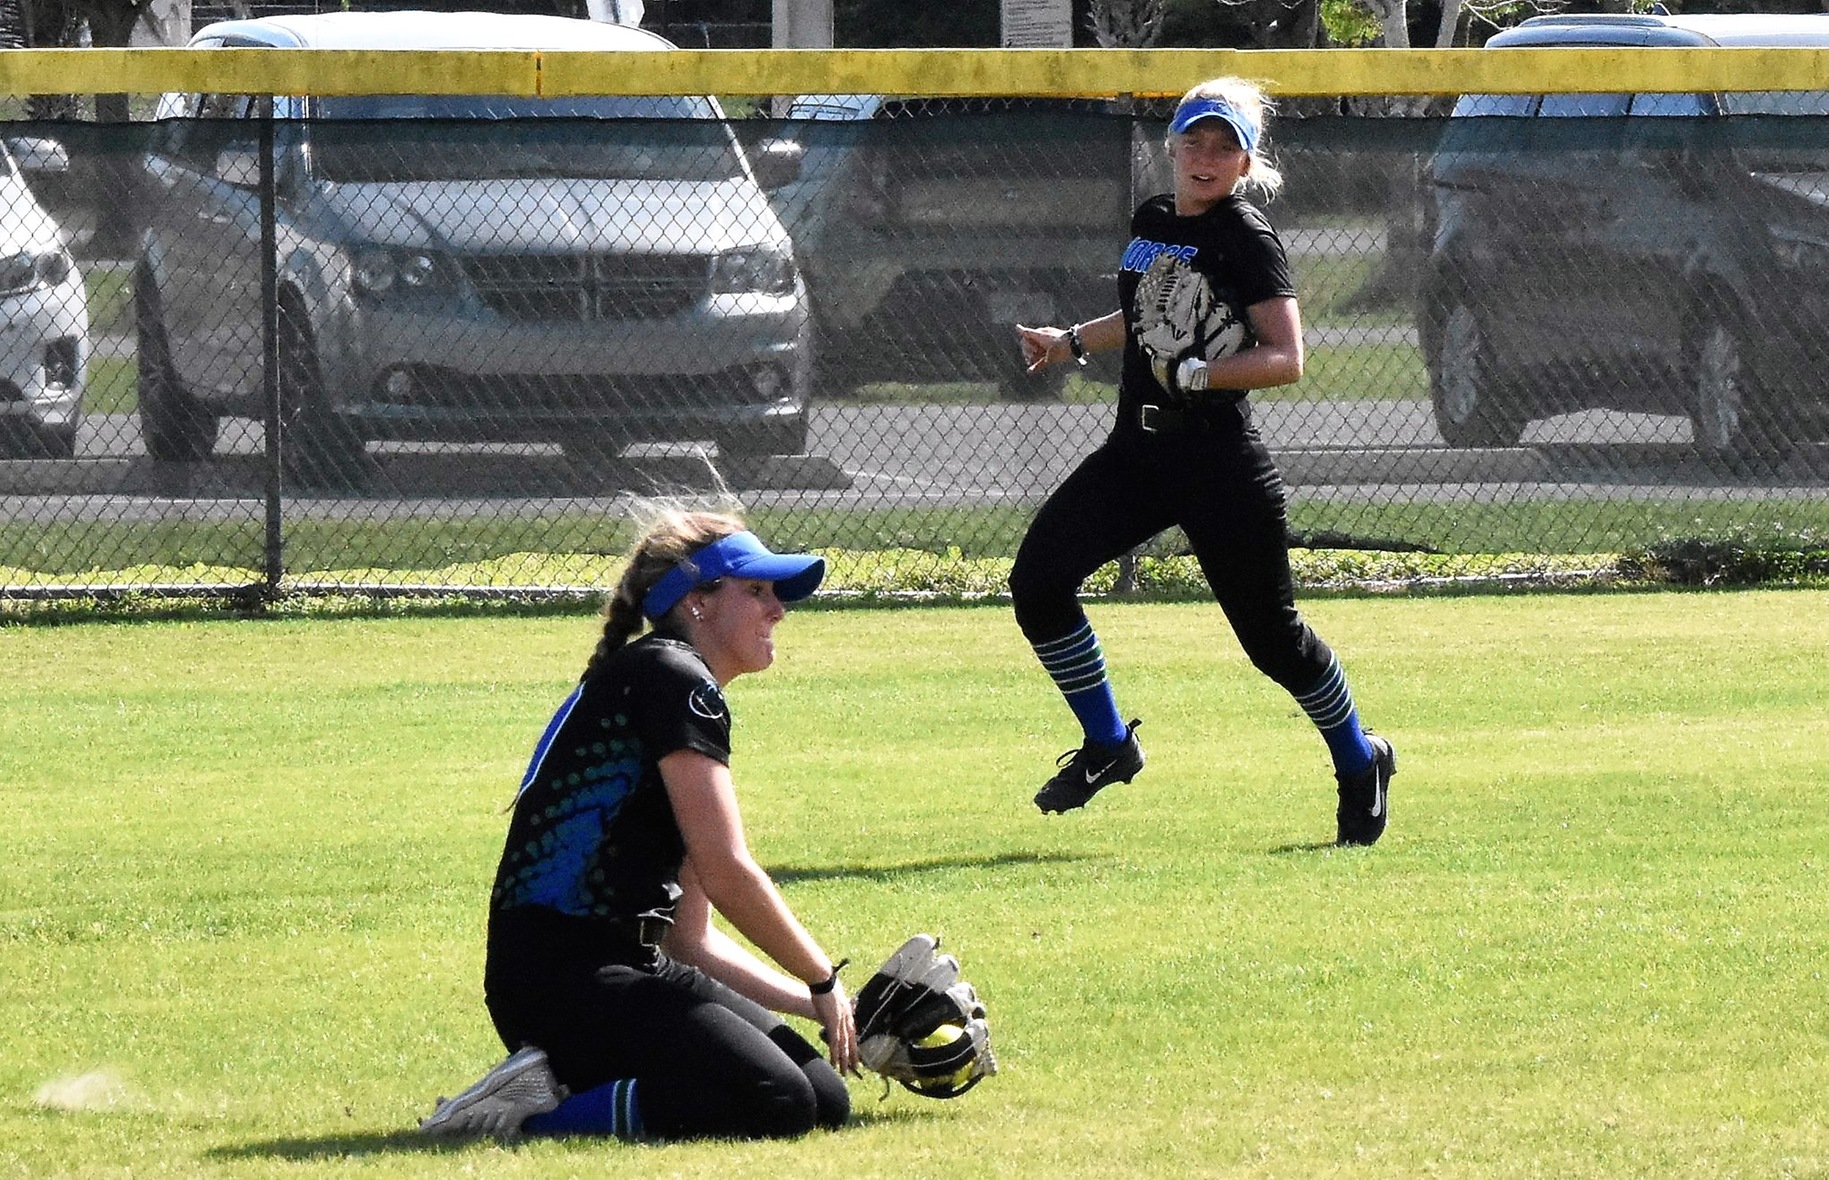 Jerricka McAlpine sliding on her knees and making a catch in the outfield as Emily Bruntjens watches in the background